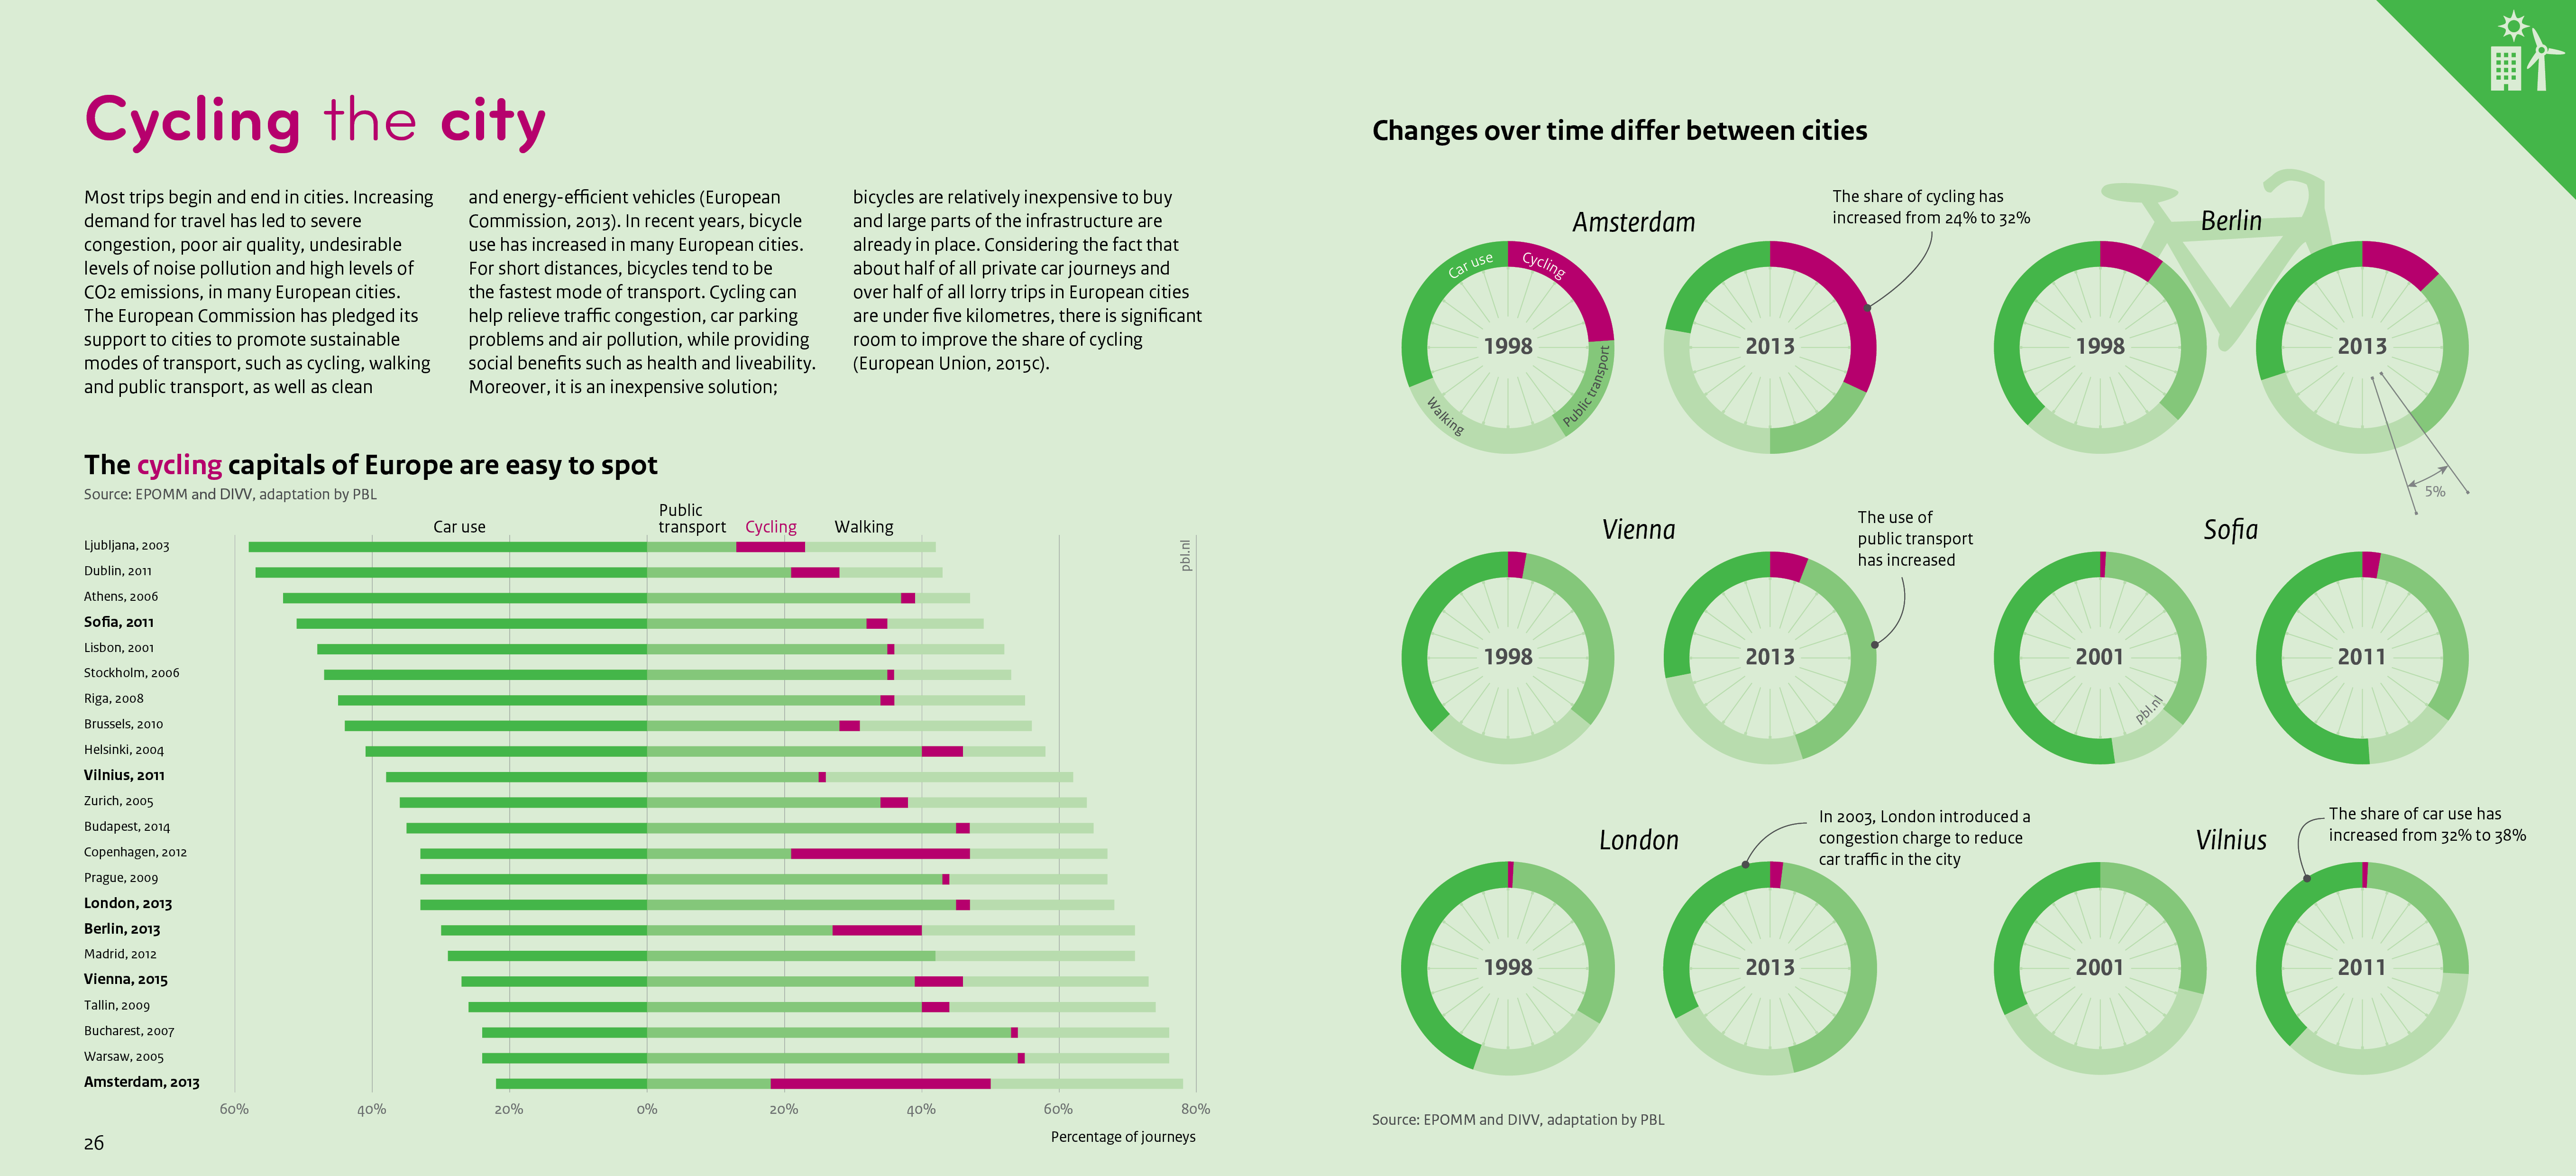 This infographic shows the modal share and the share of cycling in European capital cities.